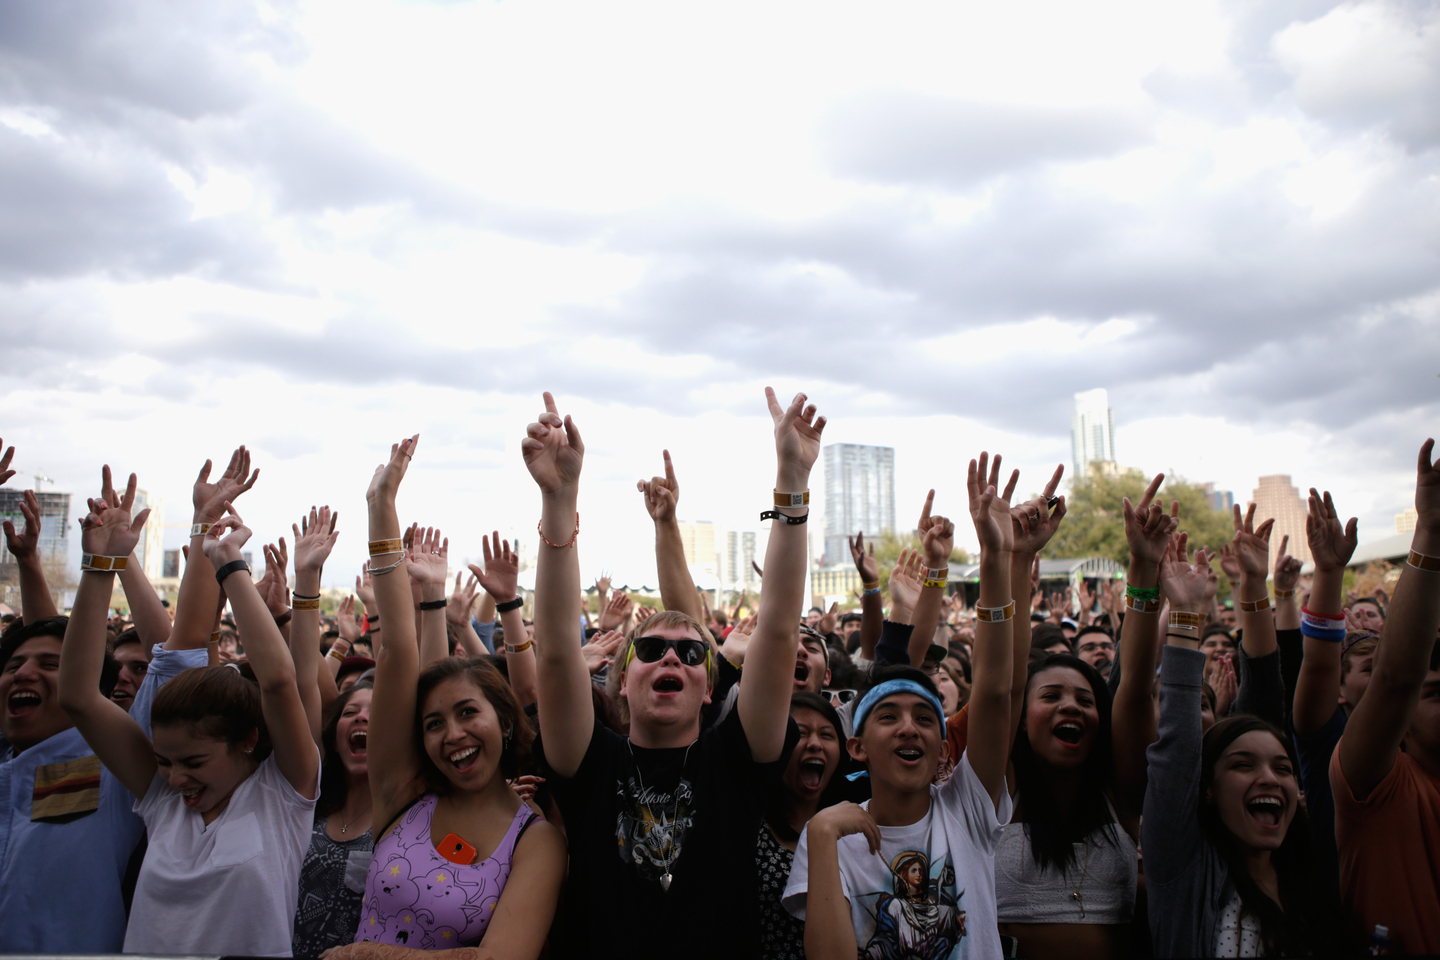 Outdoor Stage, 2014. Photo by Dustin Finkelstein/Getty Images for SXSW